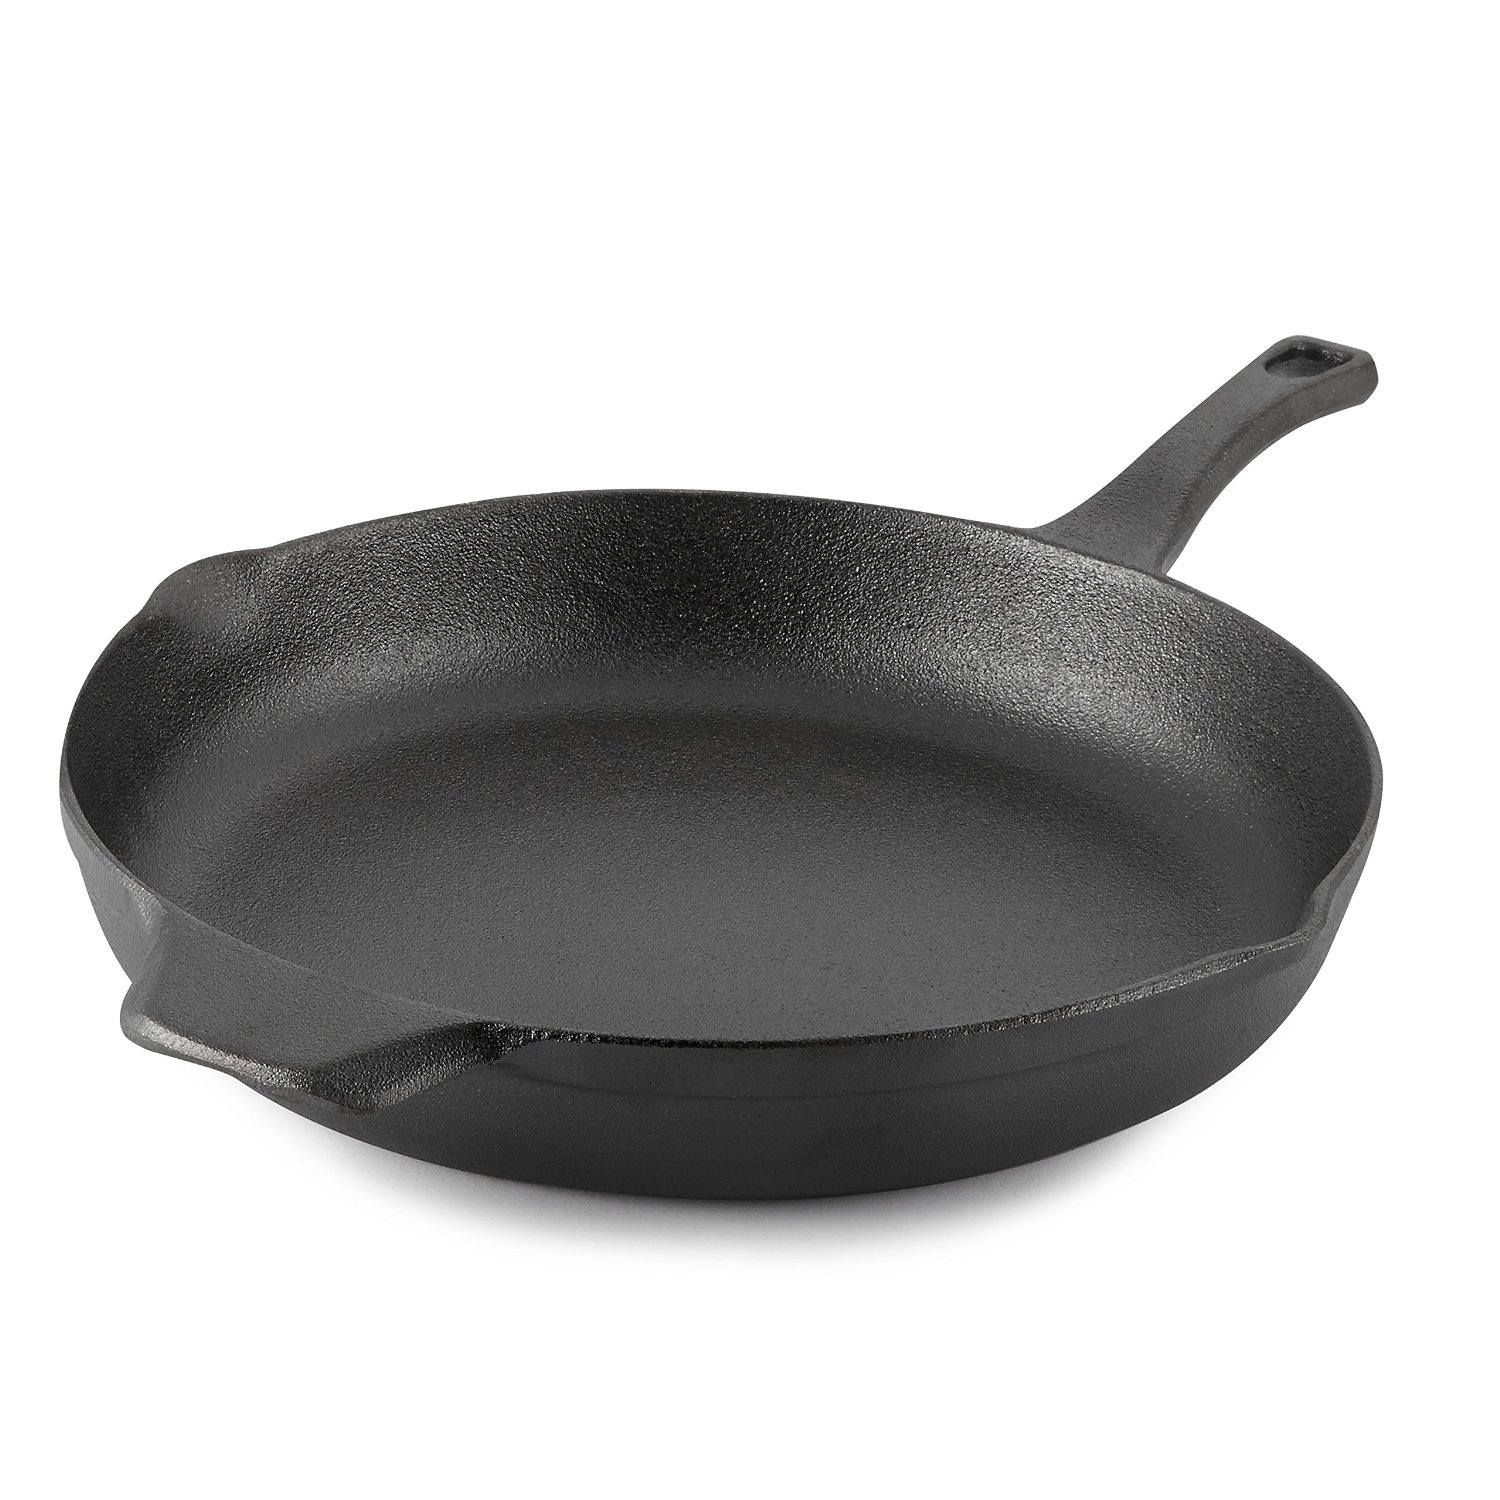 Iron Cookware Skillet 12-inch